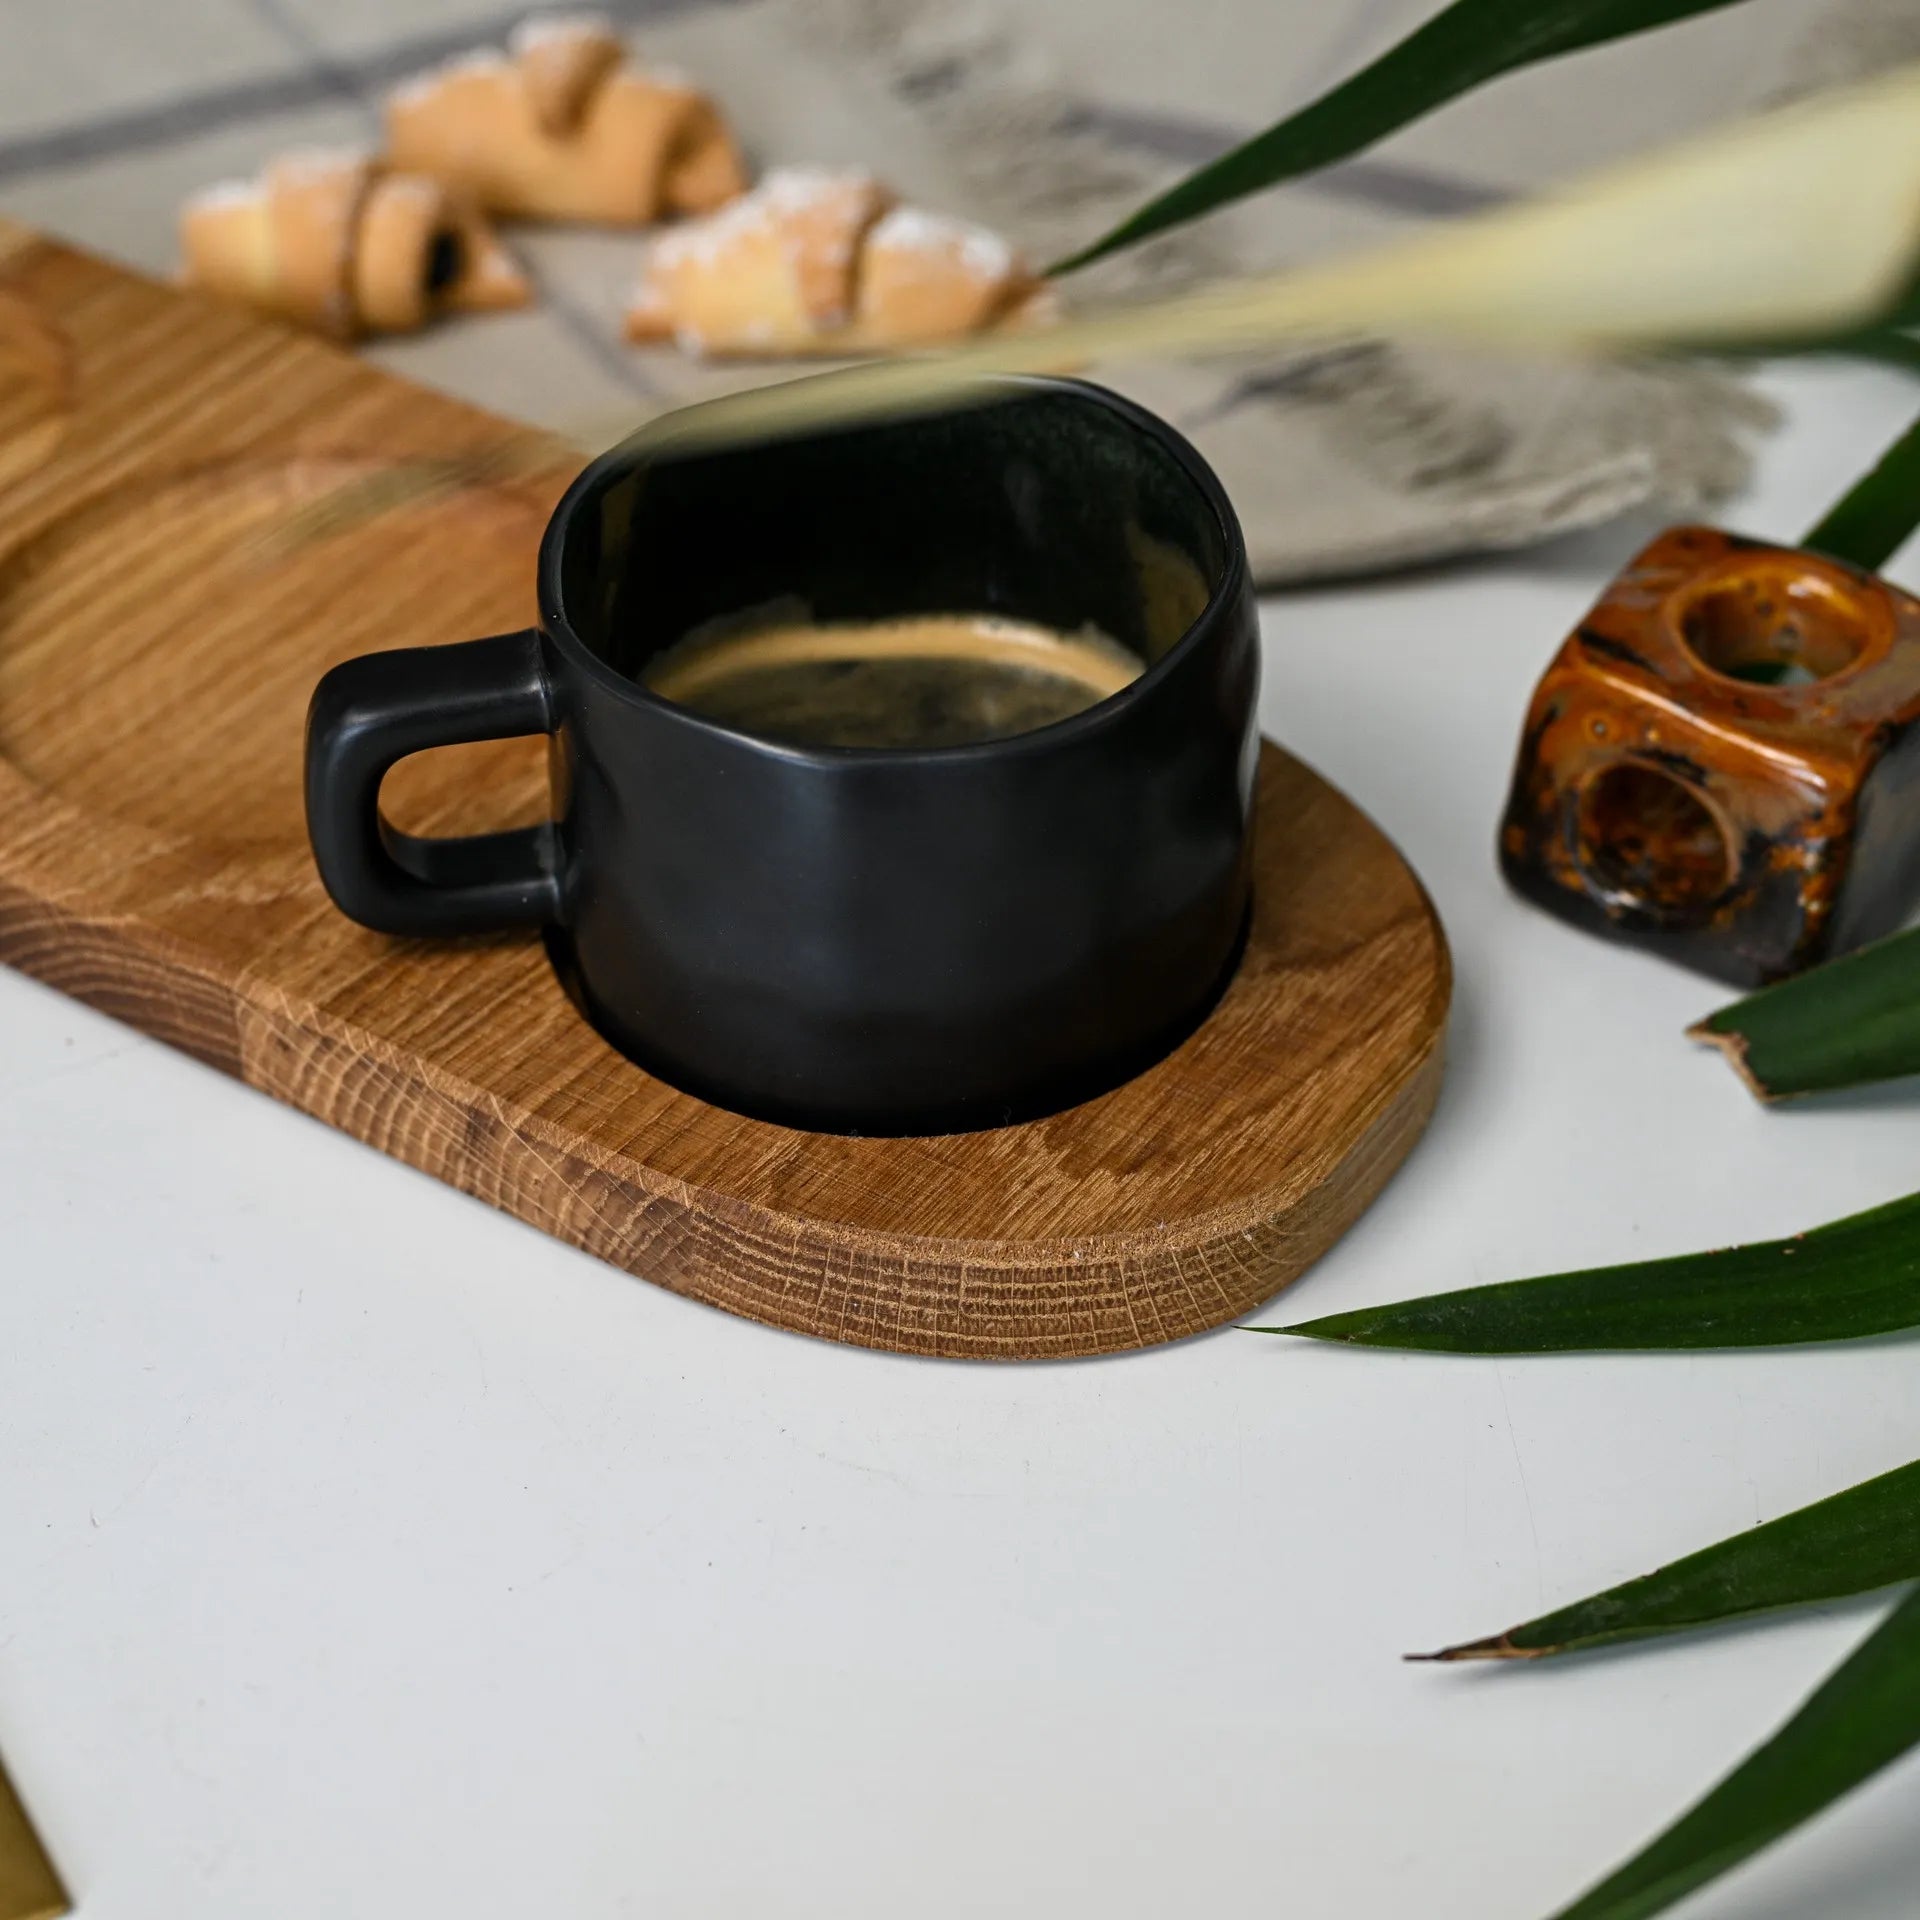 Customized wooden tray designed for cafes and restaurants, ideal for stylishly serving food and beverages.